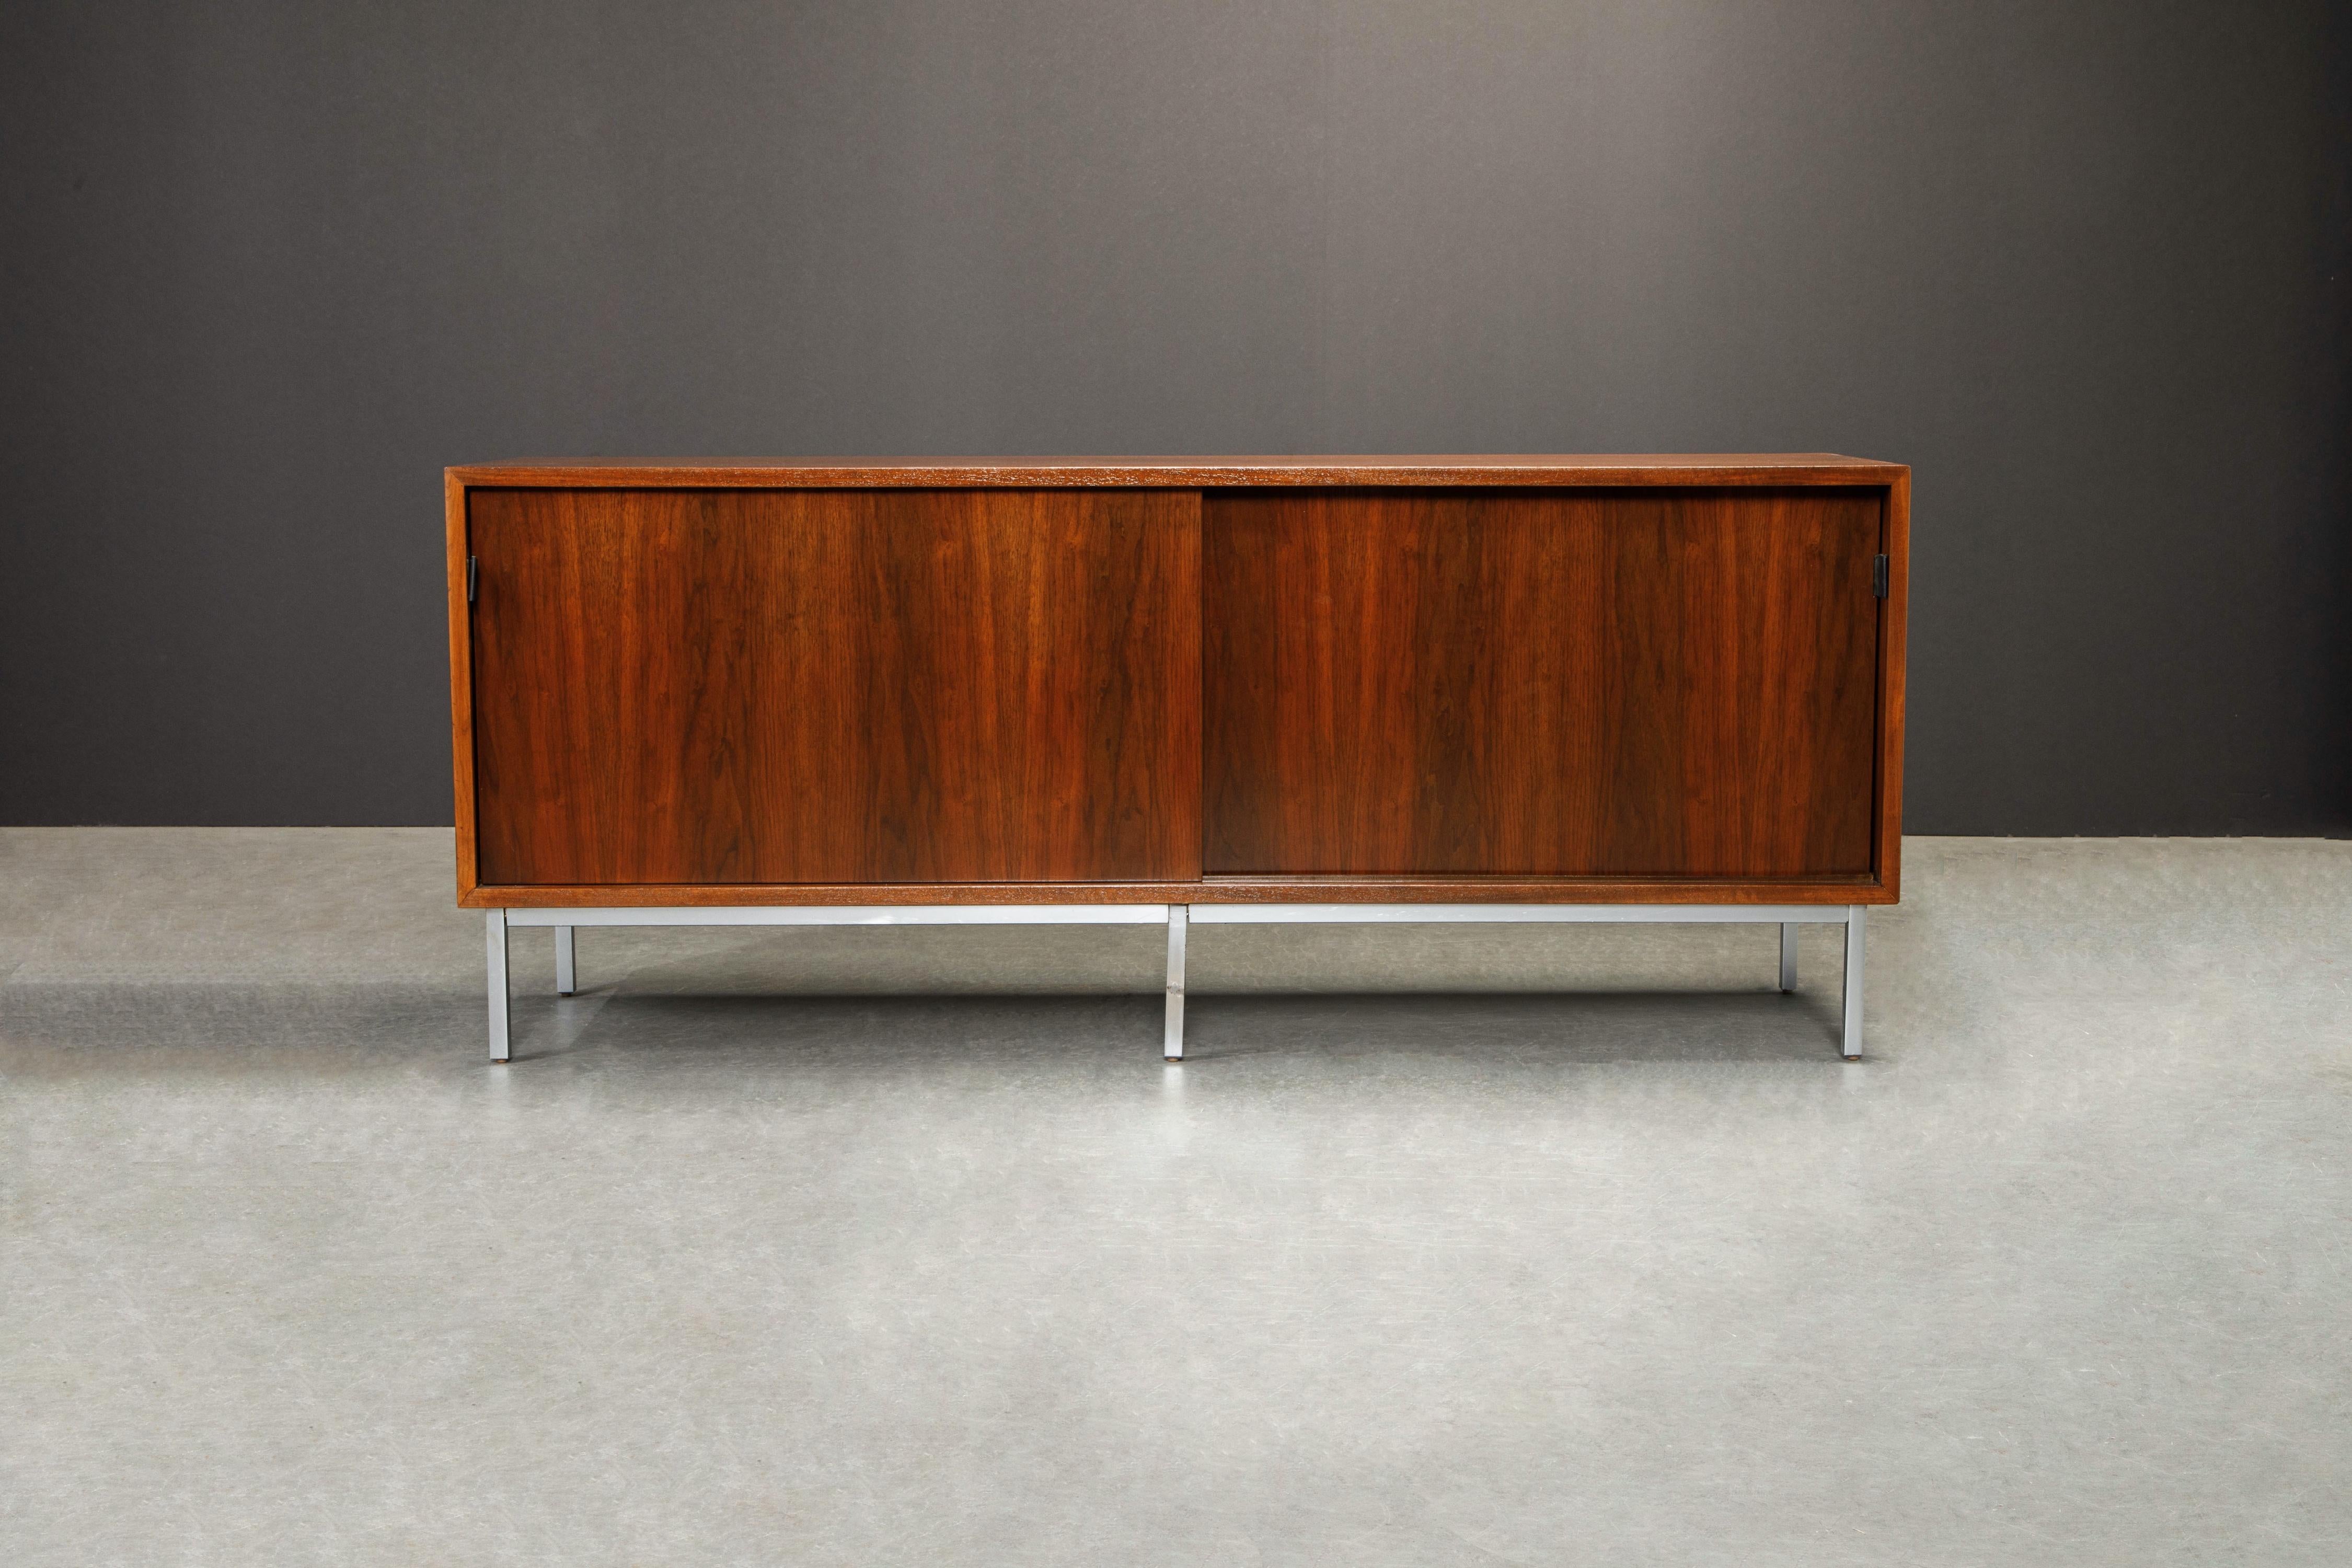 Sleekly designed credenza by Florence Knoll for Knoll Studio signed with Knoll Studio and Florence Knoll's signature on one leg. This newly restored sideboard credenza is fabricated from walnut and sits on top of a metal base with six legs.

The